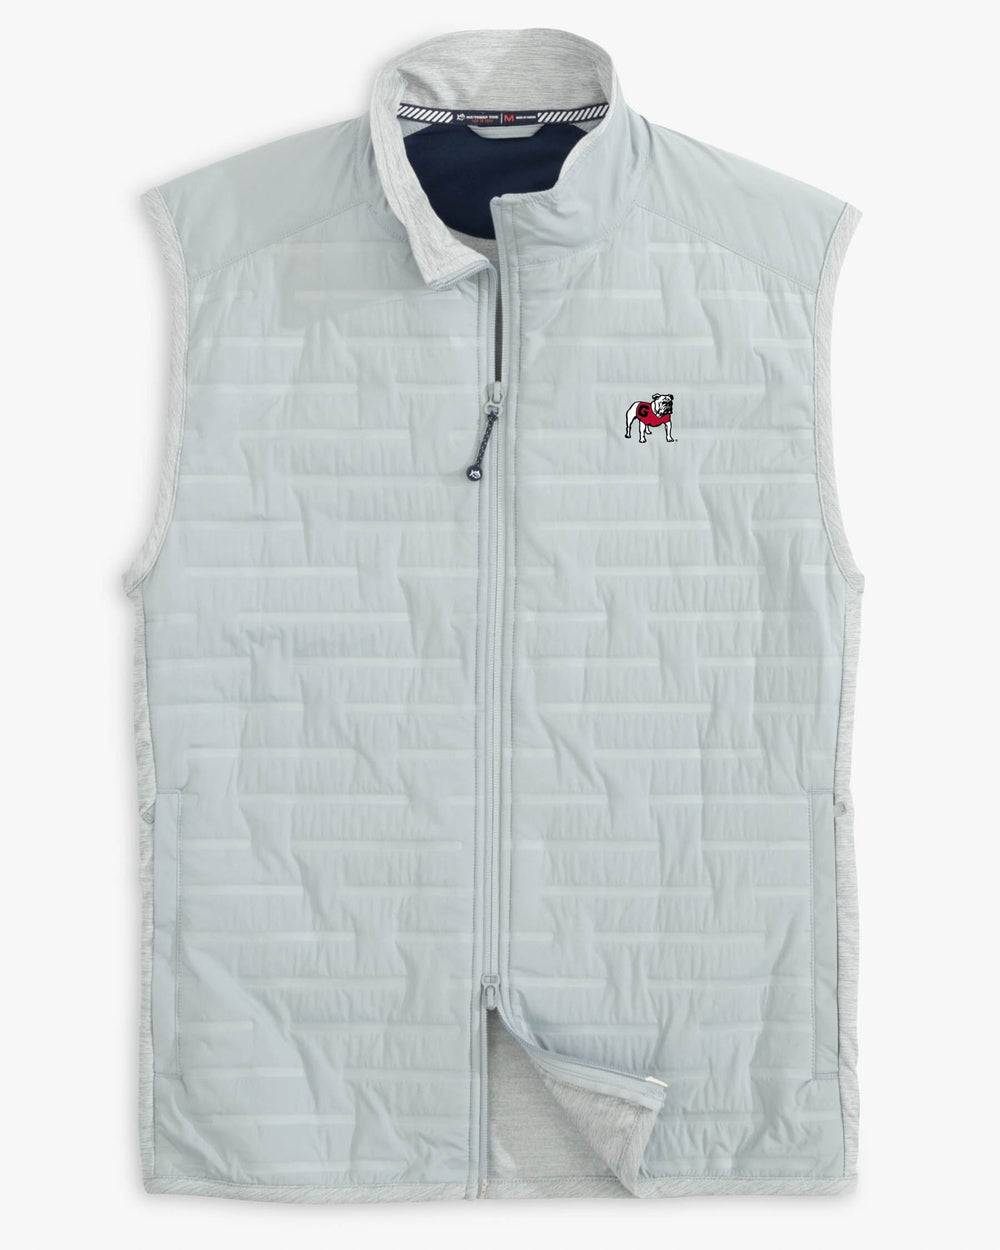 The front view of the Southern Tide Georgia Bulldogs Abercorn Vest by Southern Tide - Gravel Grey